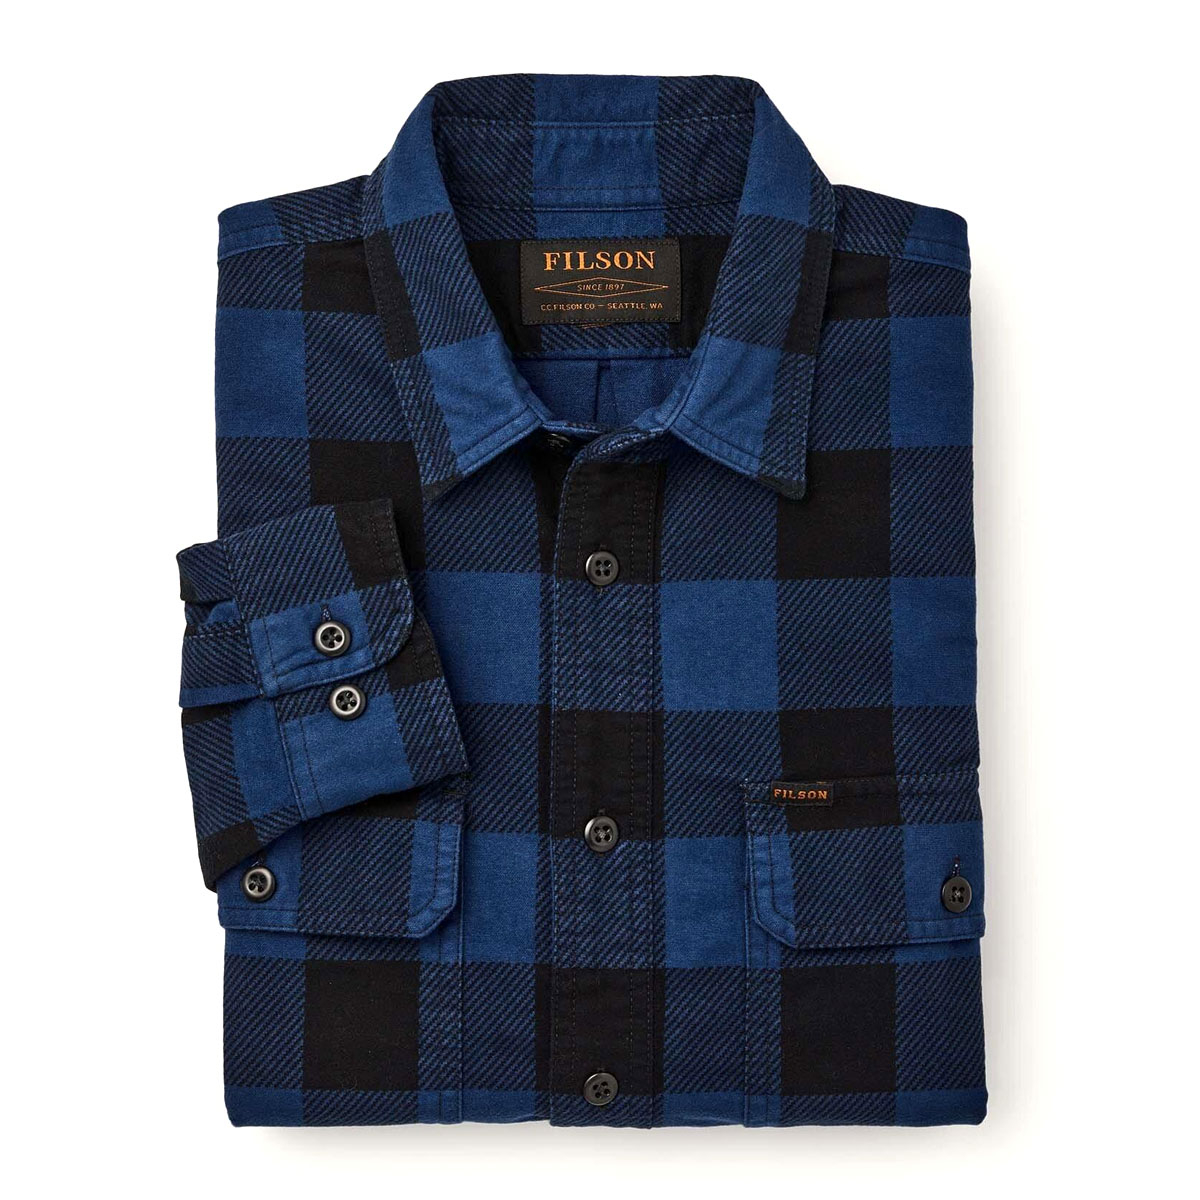 Filson Field Flannel Shirt Cobalt Black Buffalo, comfortable and as soft as it is strong